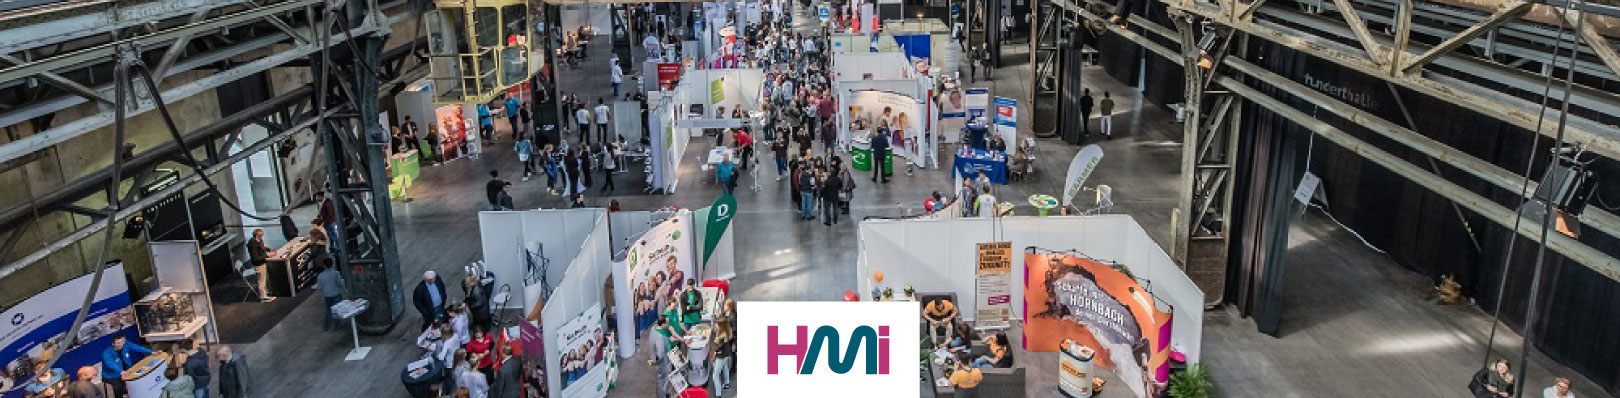 List of Trade Fairs in Bochum | List of events in Bochum on hmi-ad website | Exhbitions and trade shows in Bochum | HMI offers giveaways for trade shows in Bochum with top prices and quality